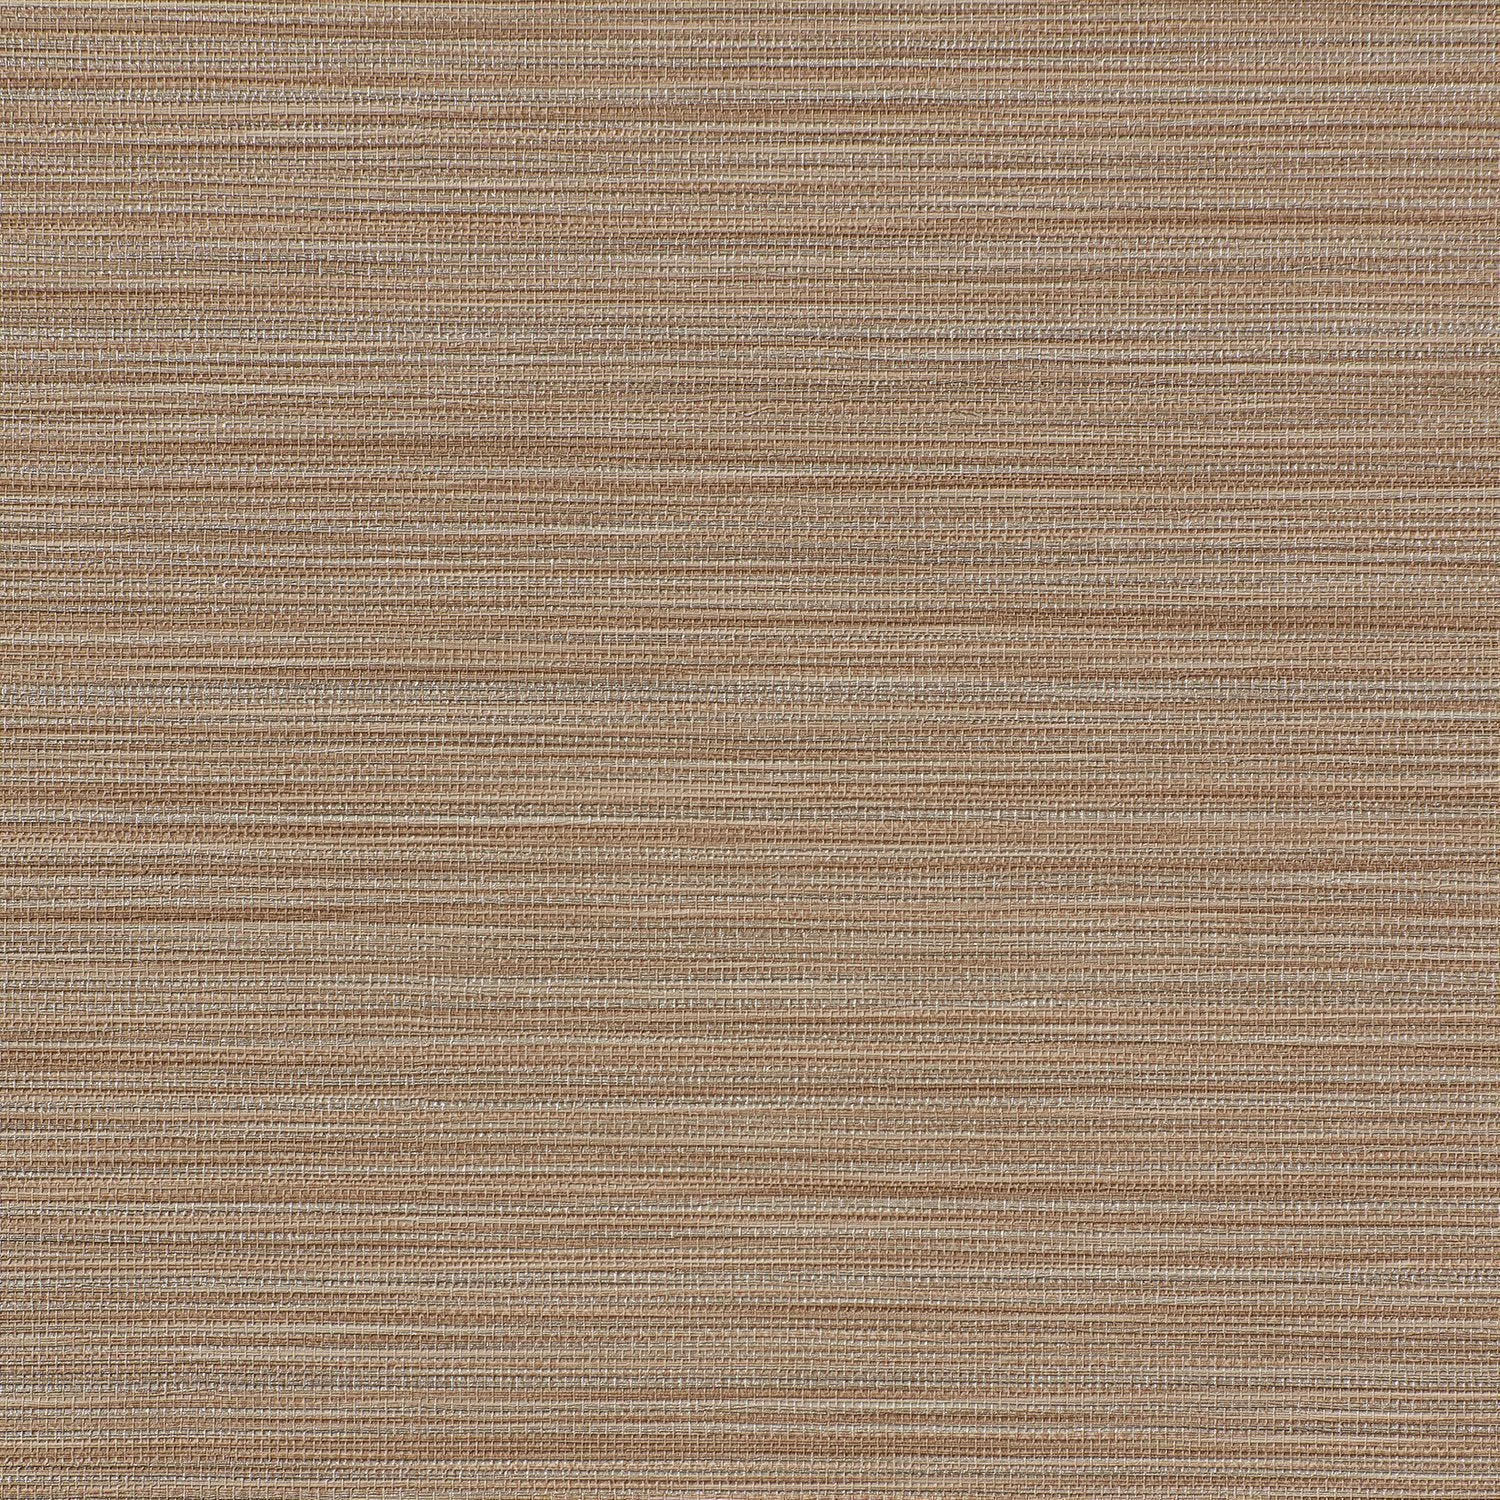 In Stitches - Y47818 - Wallcovering - Vycon - Kube Contract